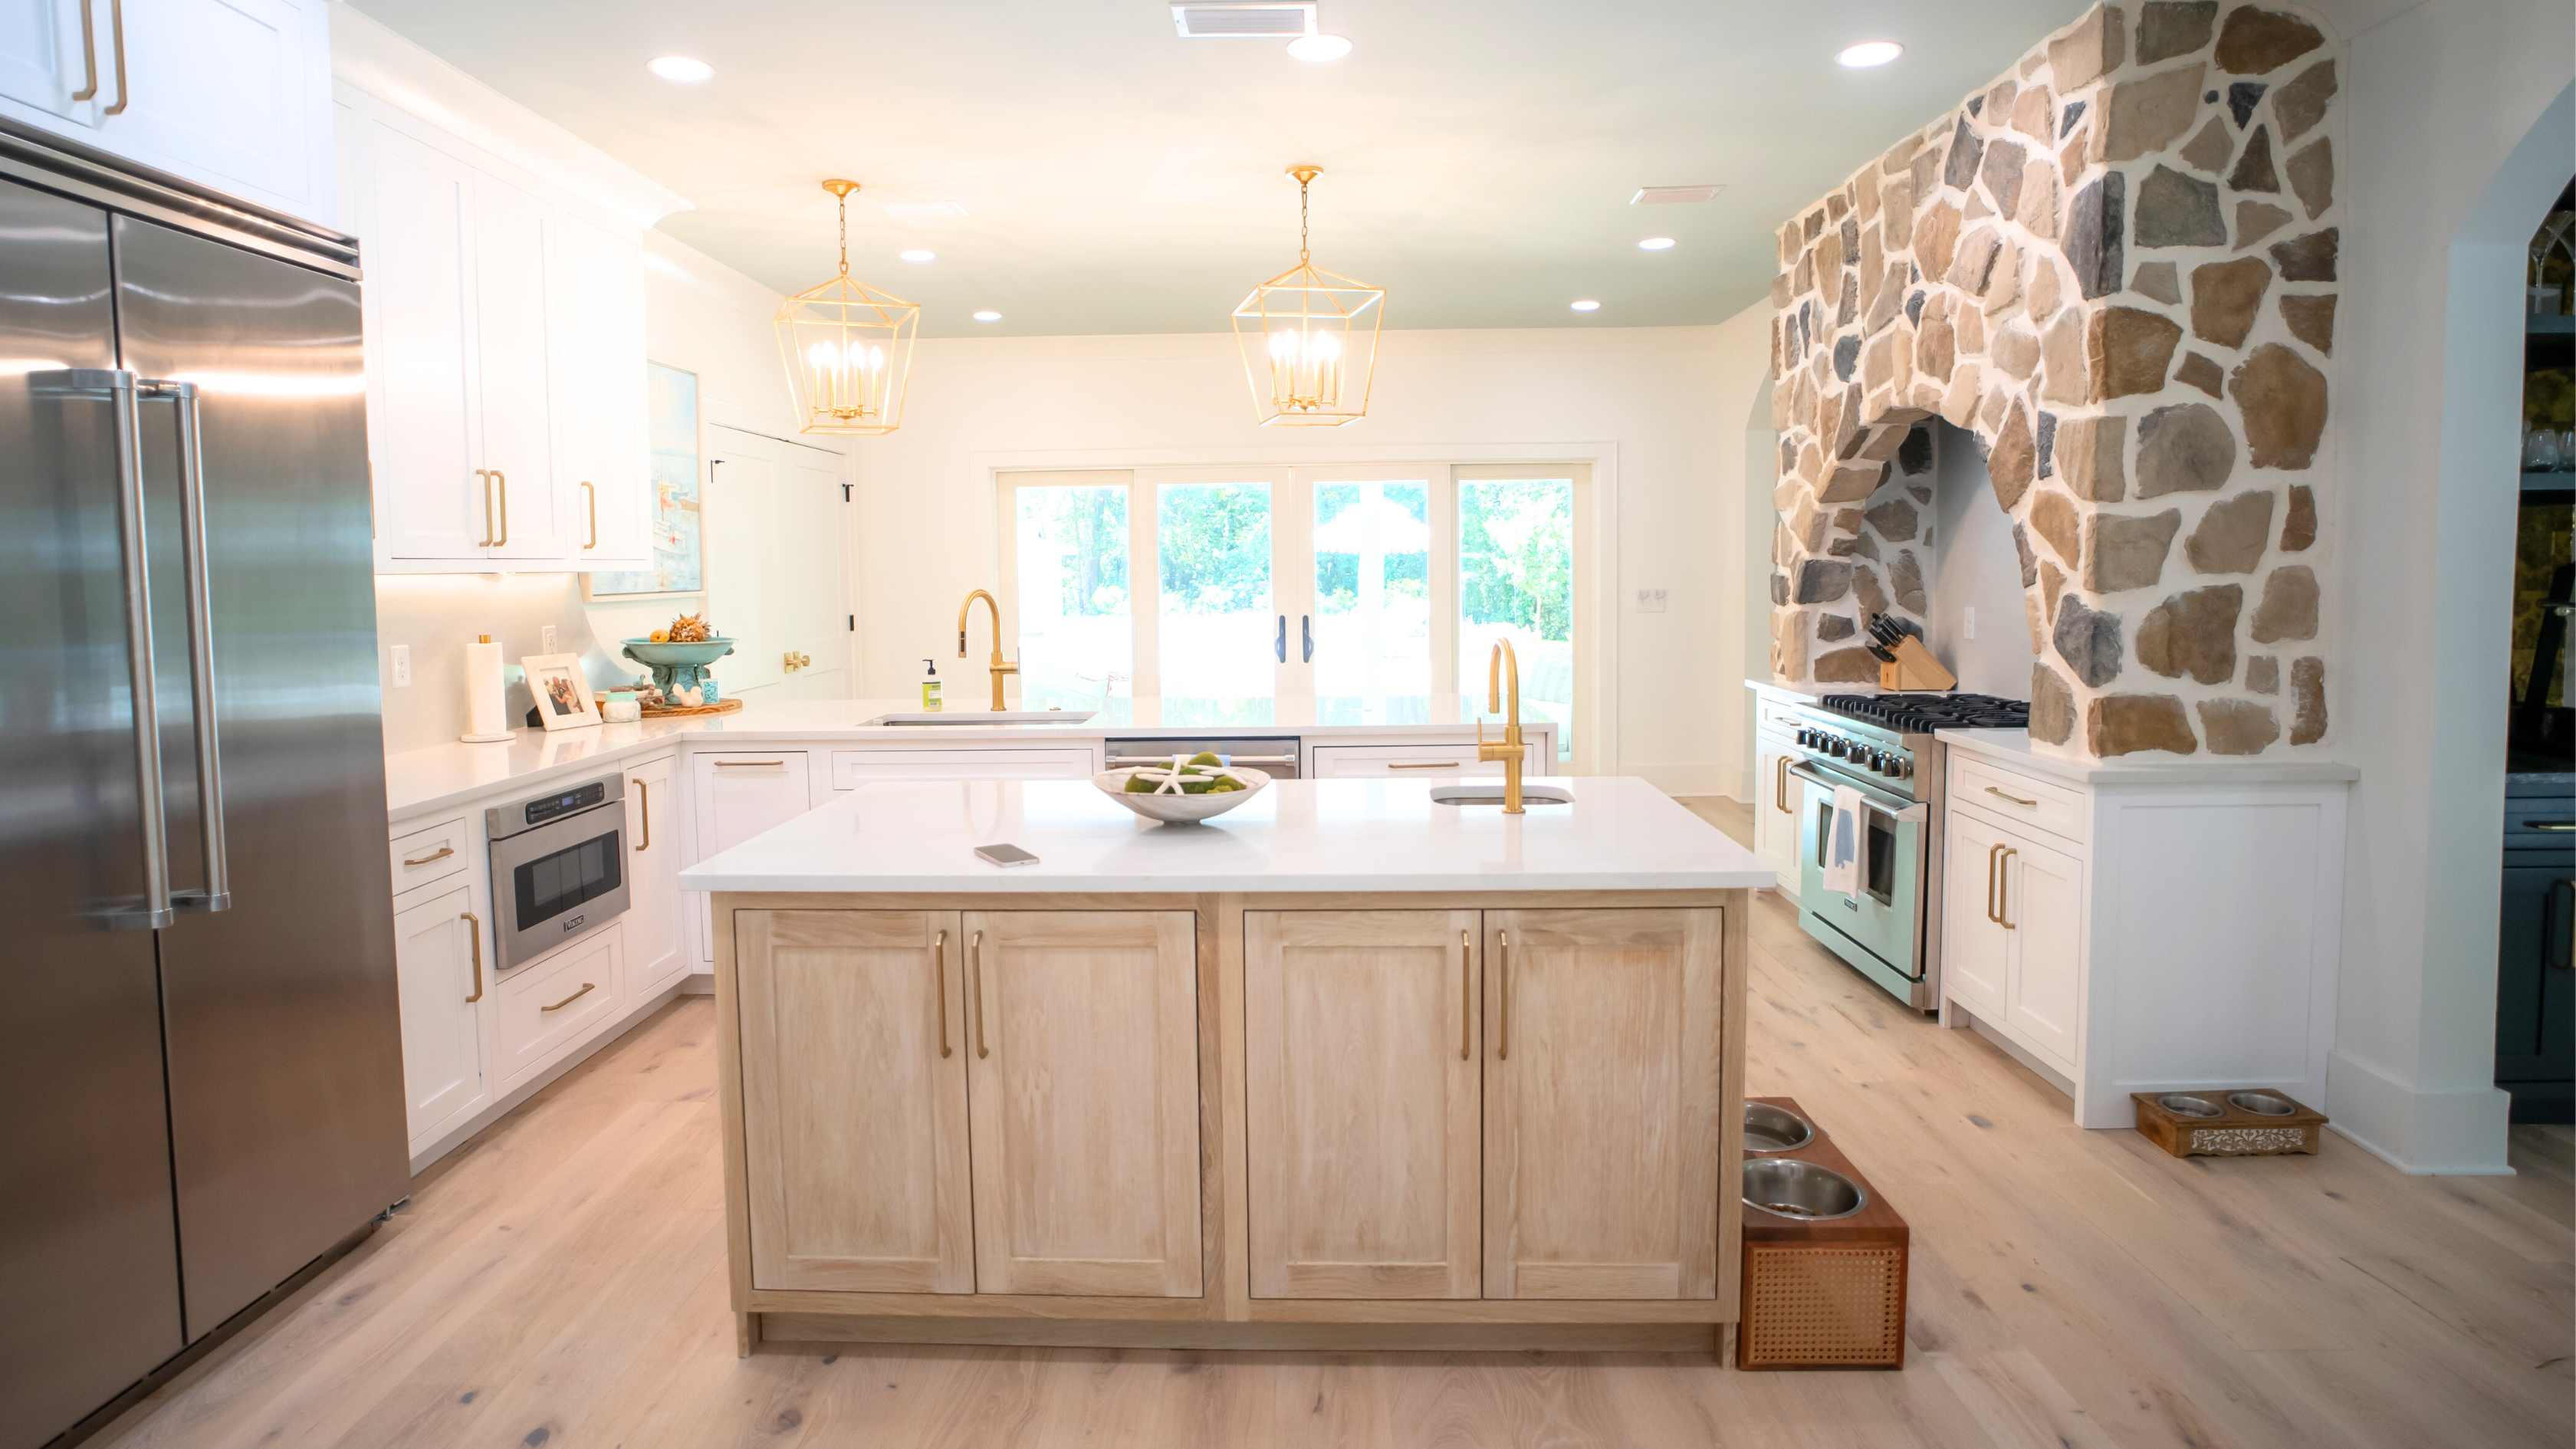 Helpful Tips for Planning a Kitchen Remodel!